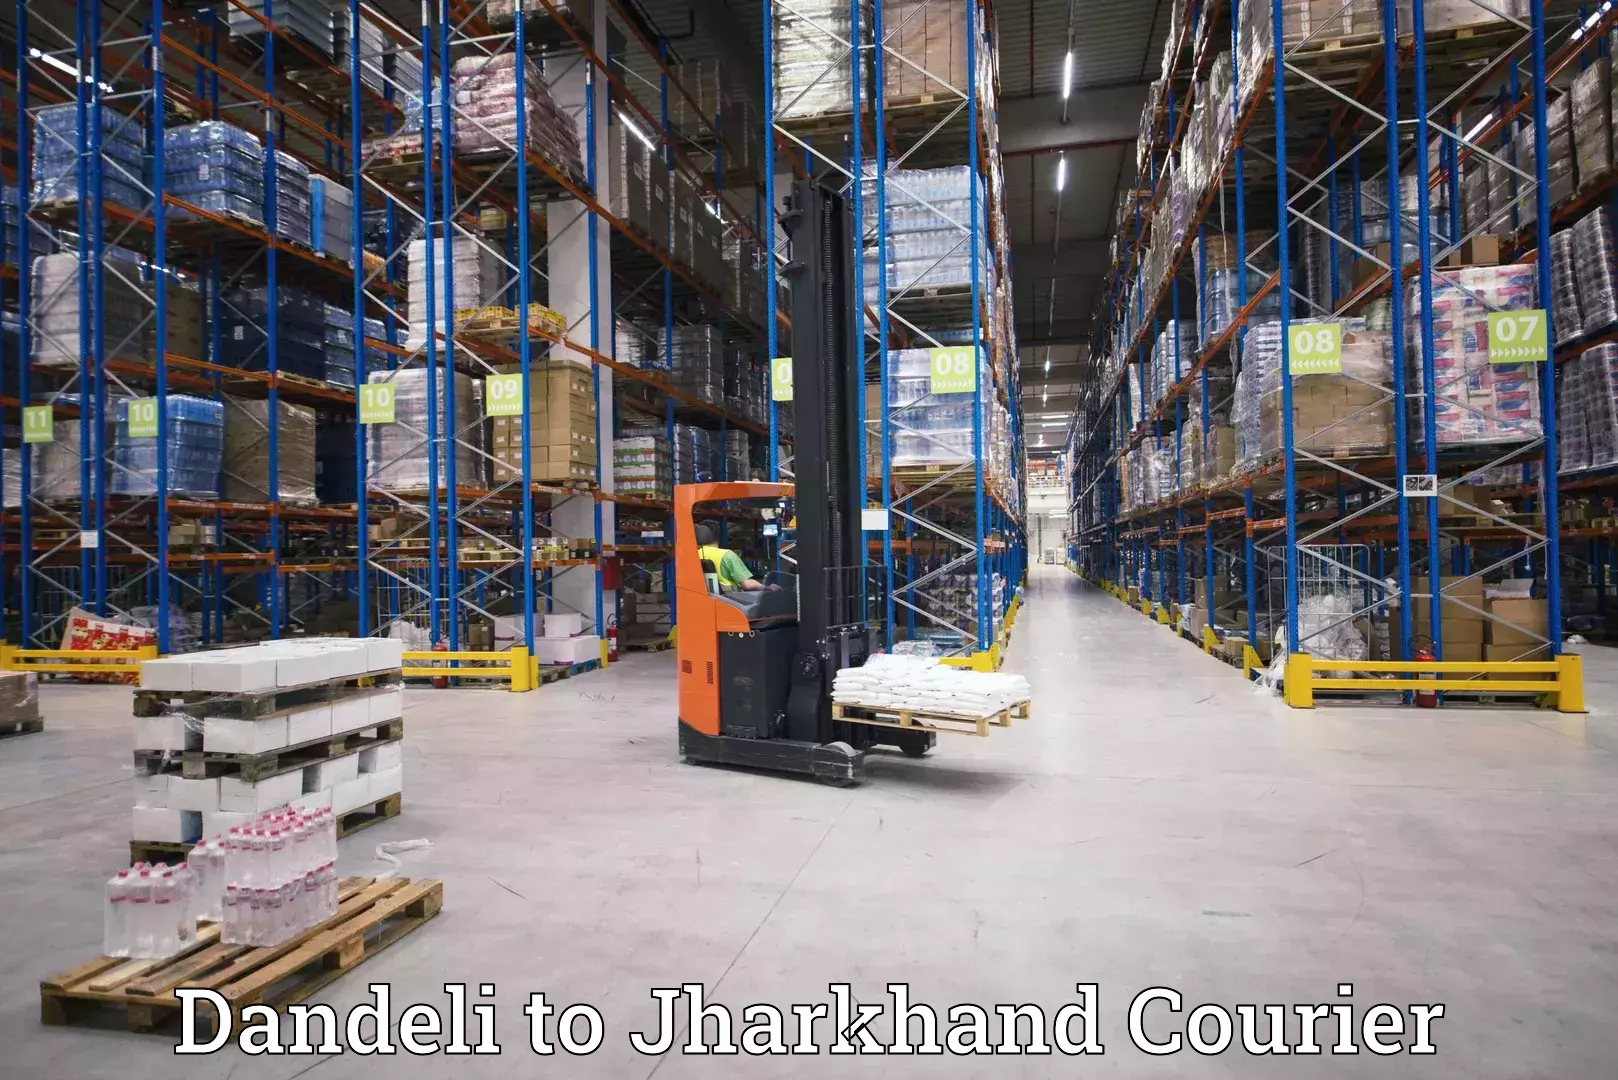 Business delivery service Dandeli to Jharkhand